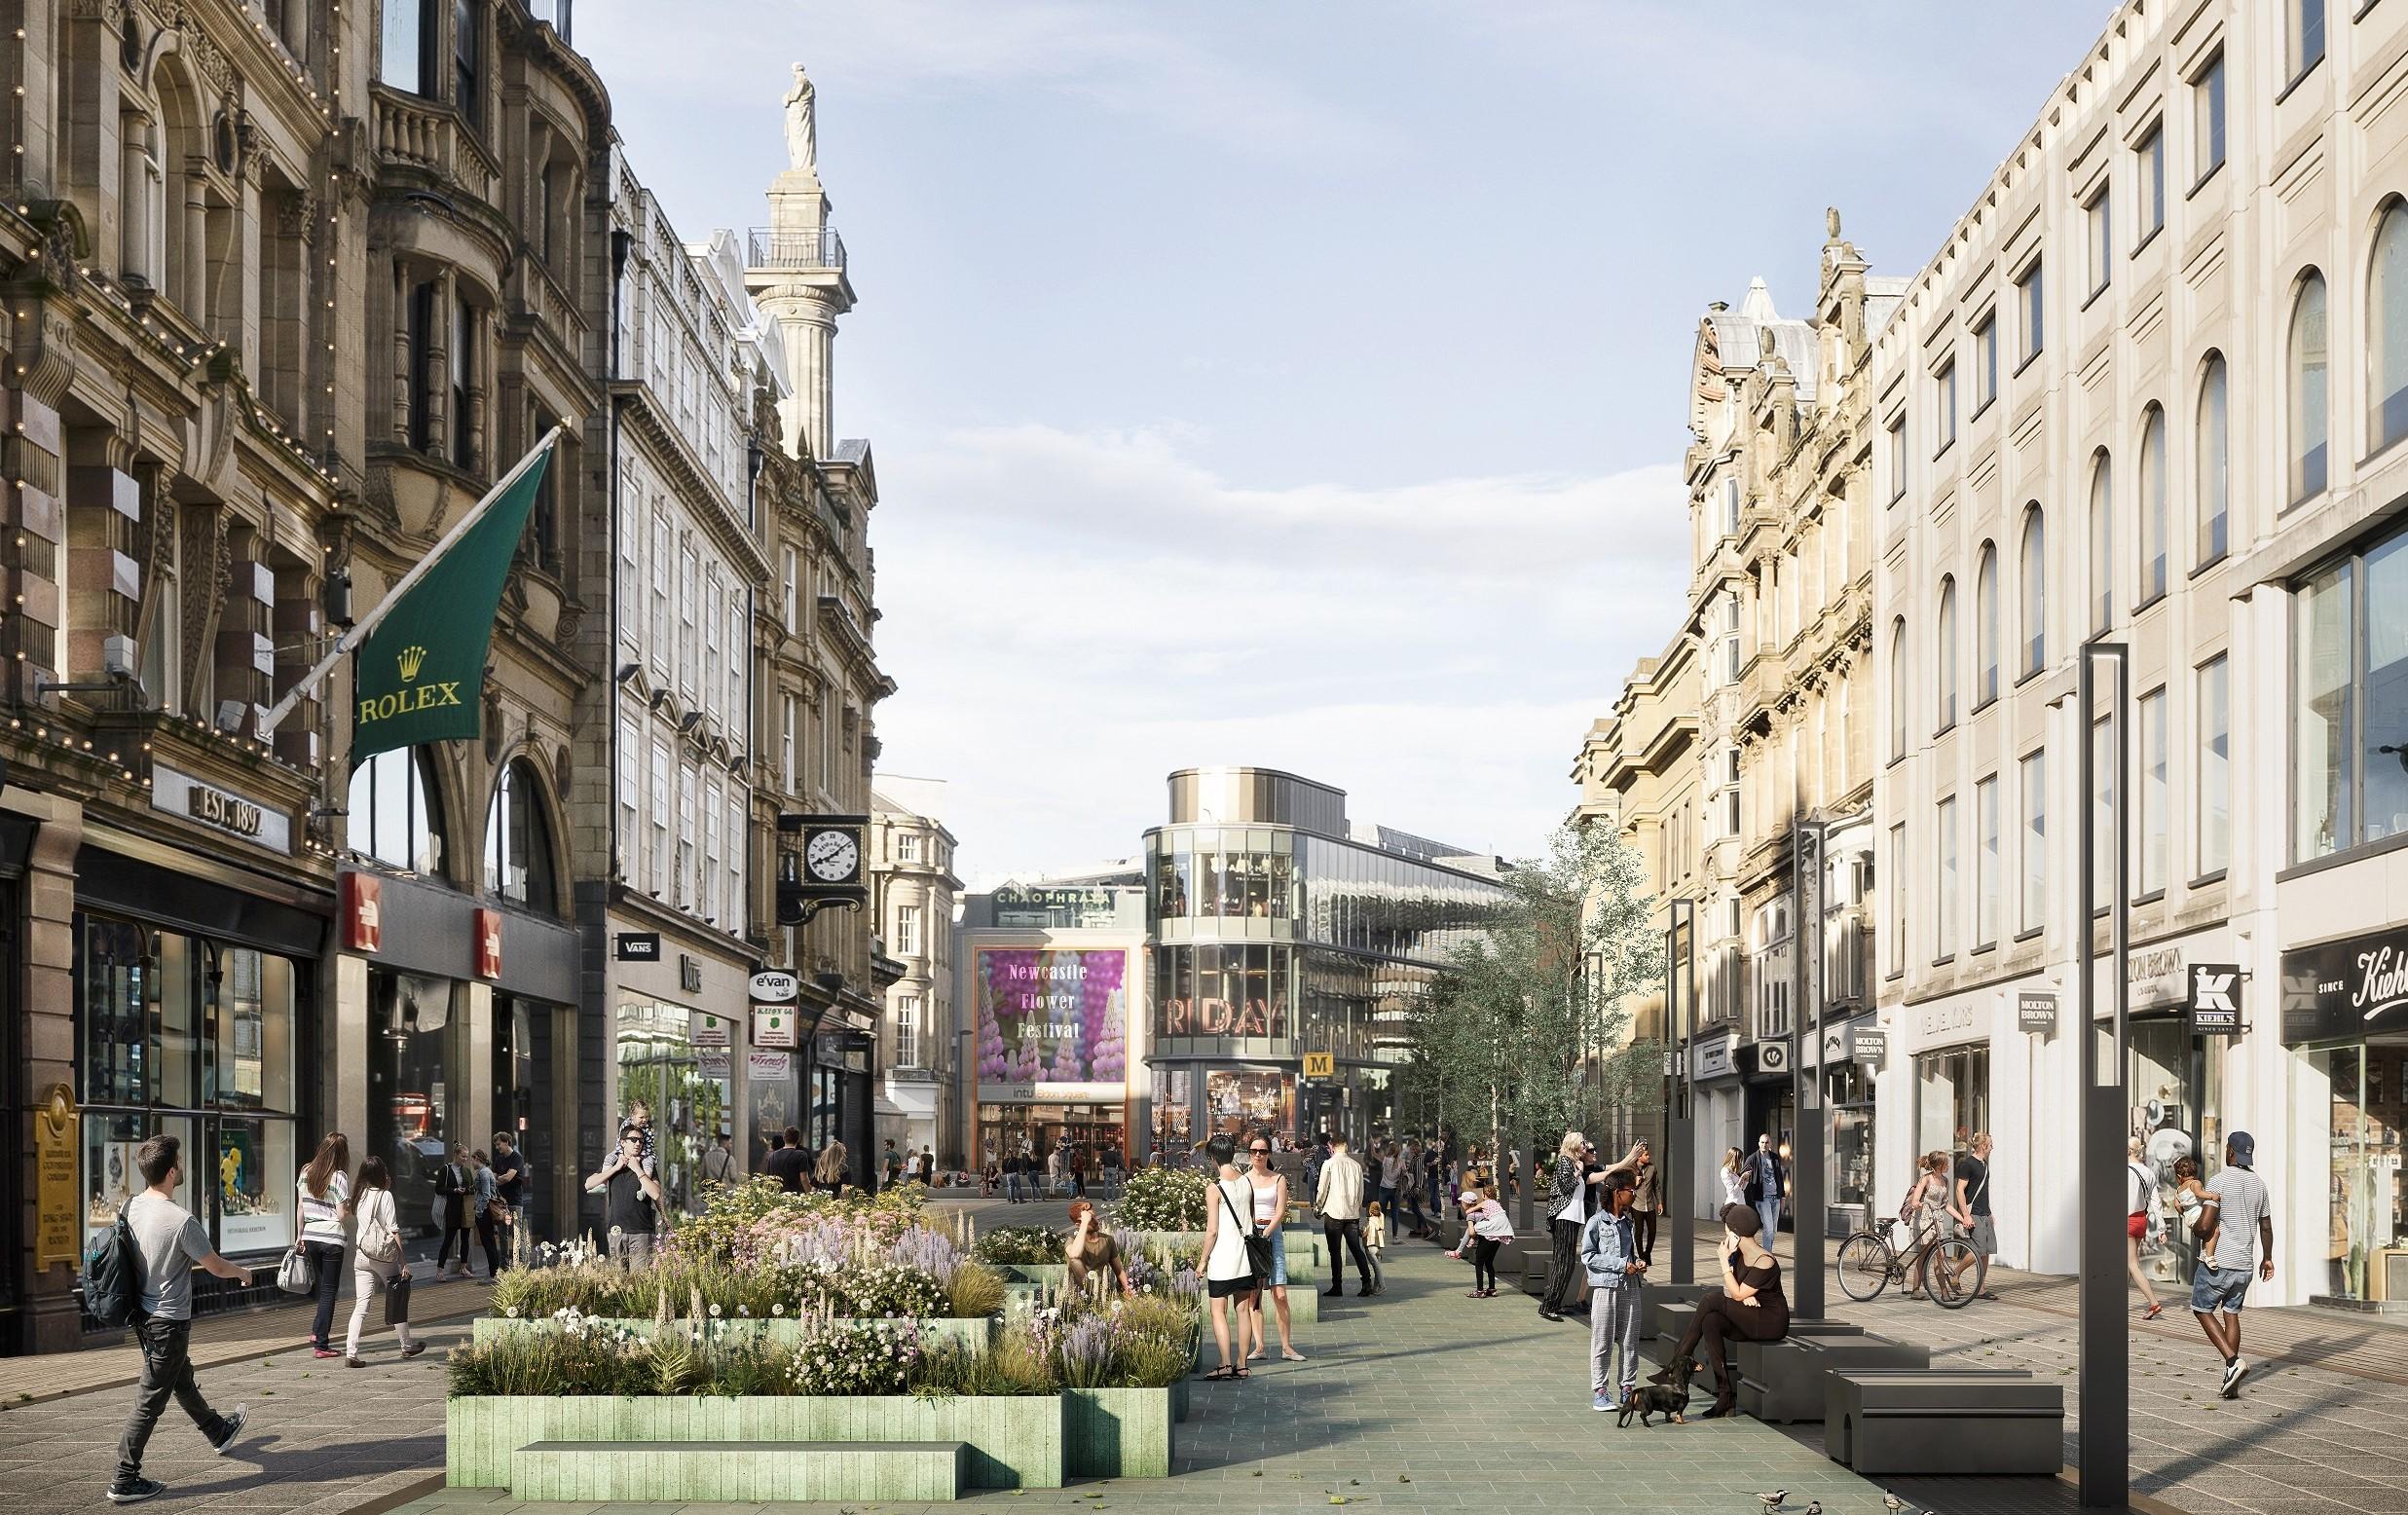 A computer generated image showing a traffic-free city centre street with people and planted areas.